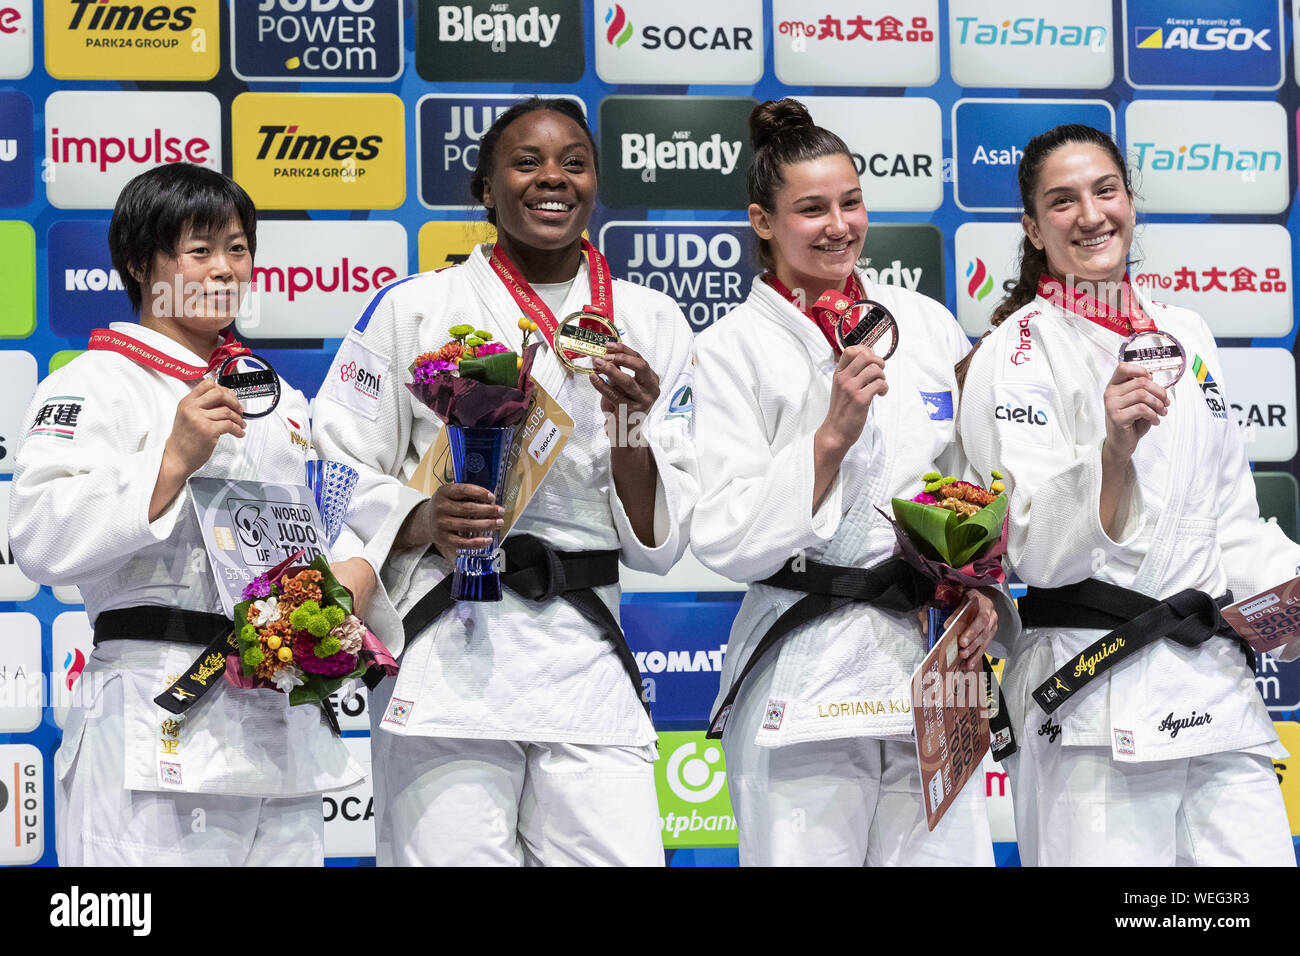 Tokyo, Japan. 30th Aug, 2019. (L to R) Silver medalist Shori Hamada of Japan, gold medalist Madeleine Malonga of France, bronze medalists Loriana Kuka of Kosovo and Mayra Aguiar of Brazil, pose for the cameras during the award ceremony of the women's -78kg category at World Judo Championships Tokyo 2019 in the Nippon Budokan. The World Judo Championships Tokyo 2019 is held from August 25 to September 1st. Credit: Rodrigo Reyes Marin/ZUMA Wire/Alamy Live News Stock Photo